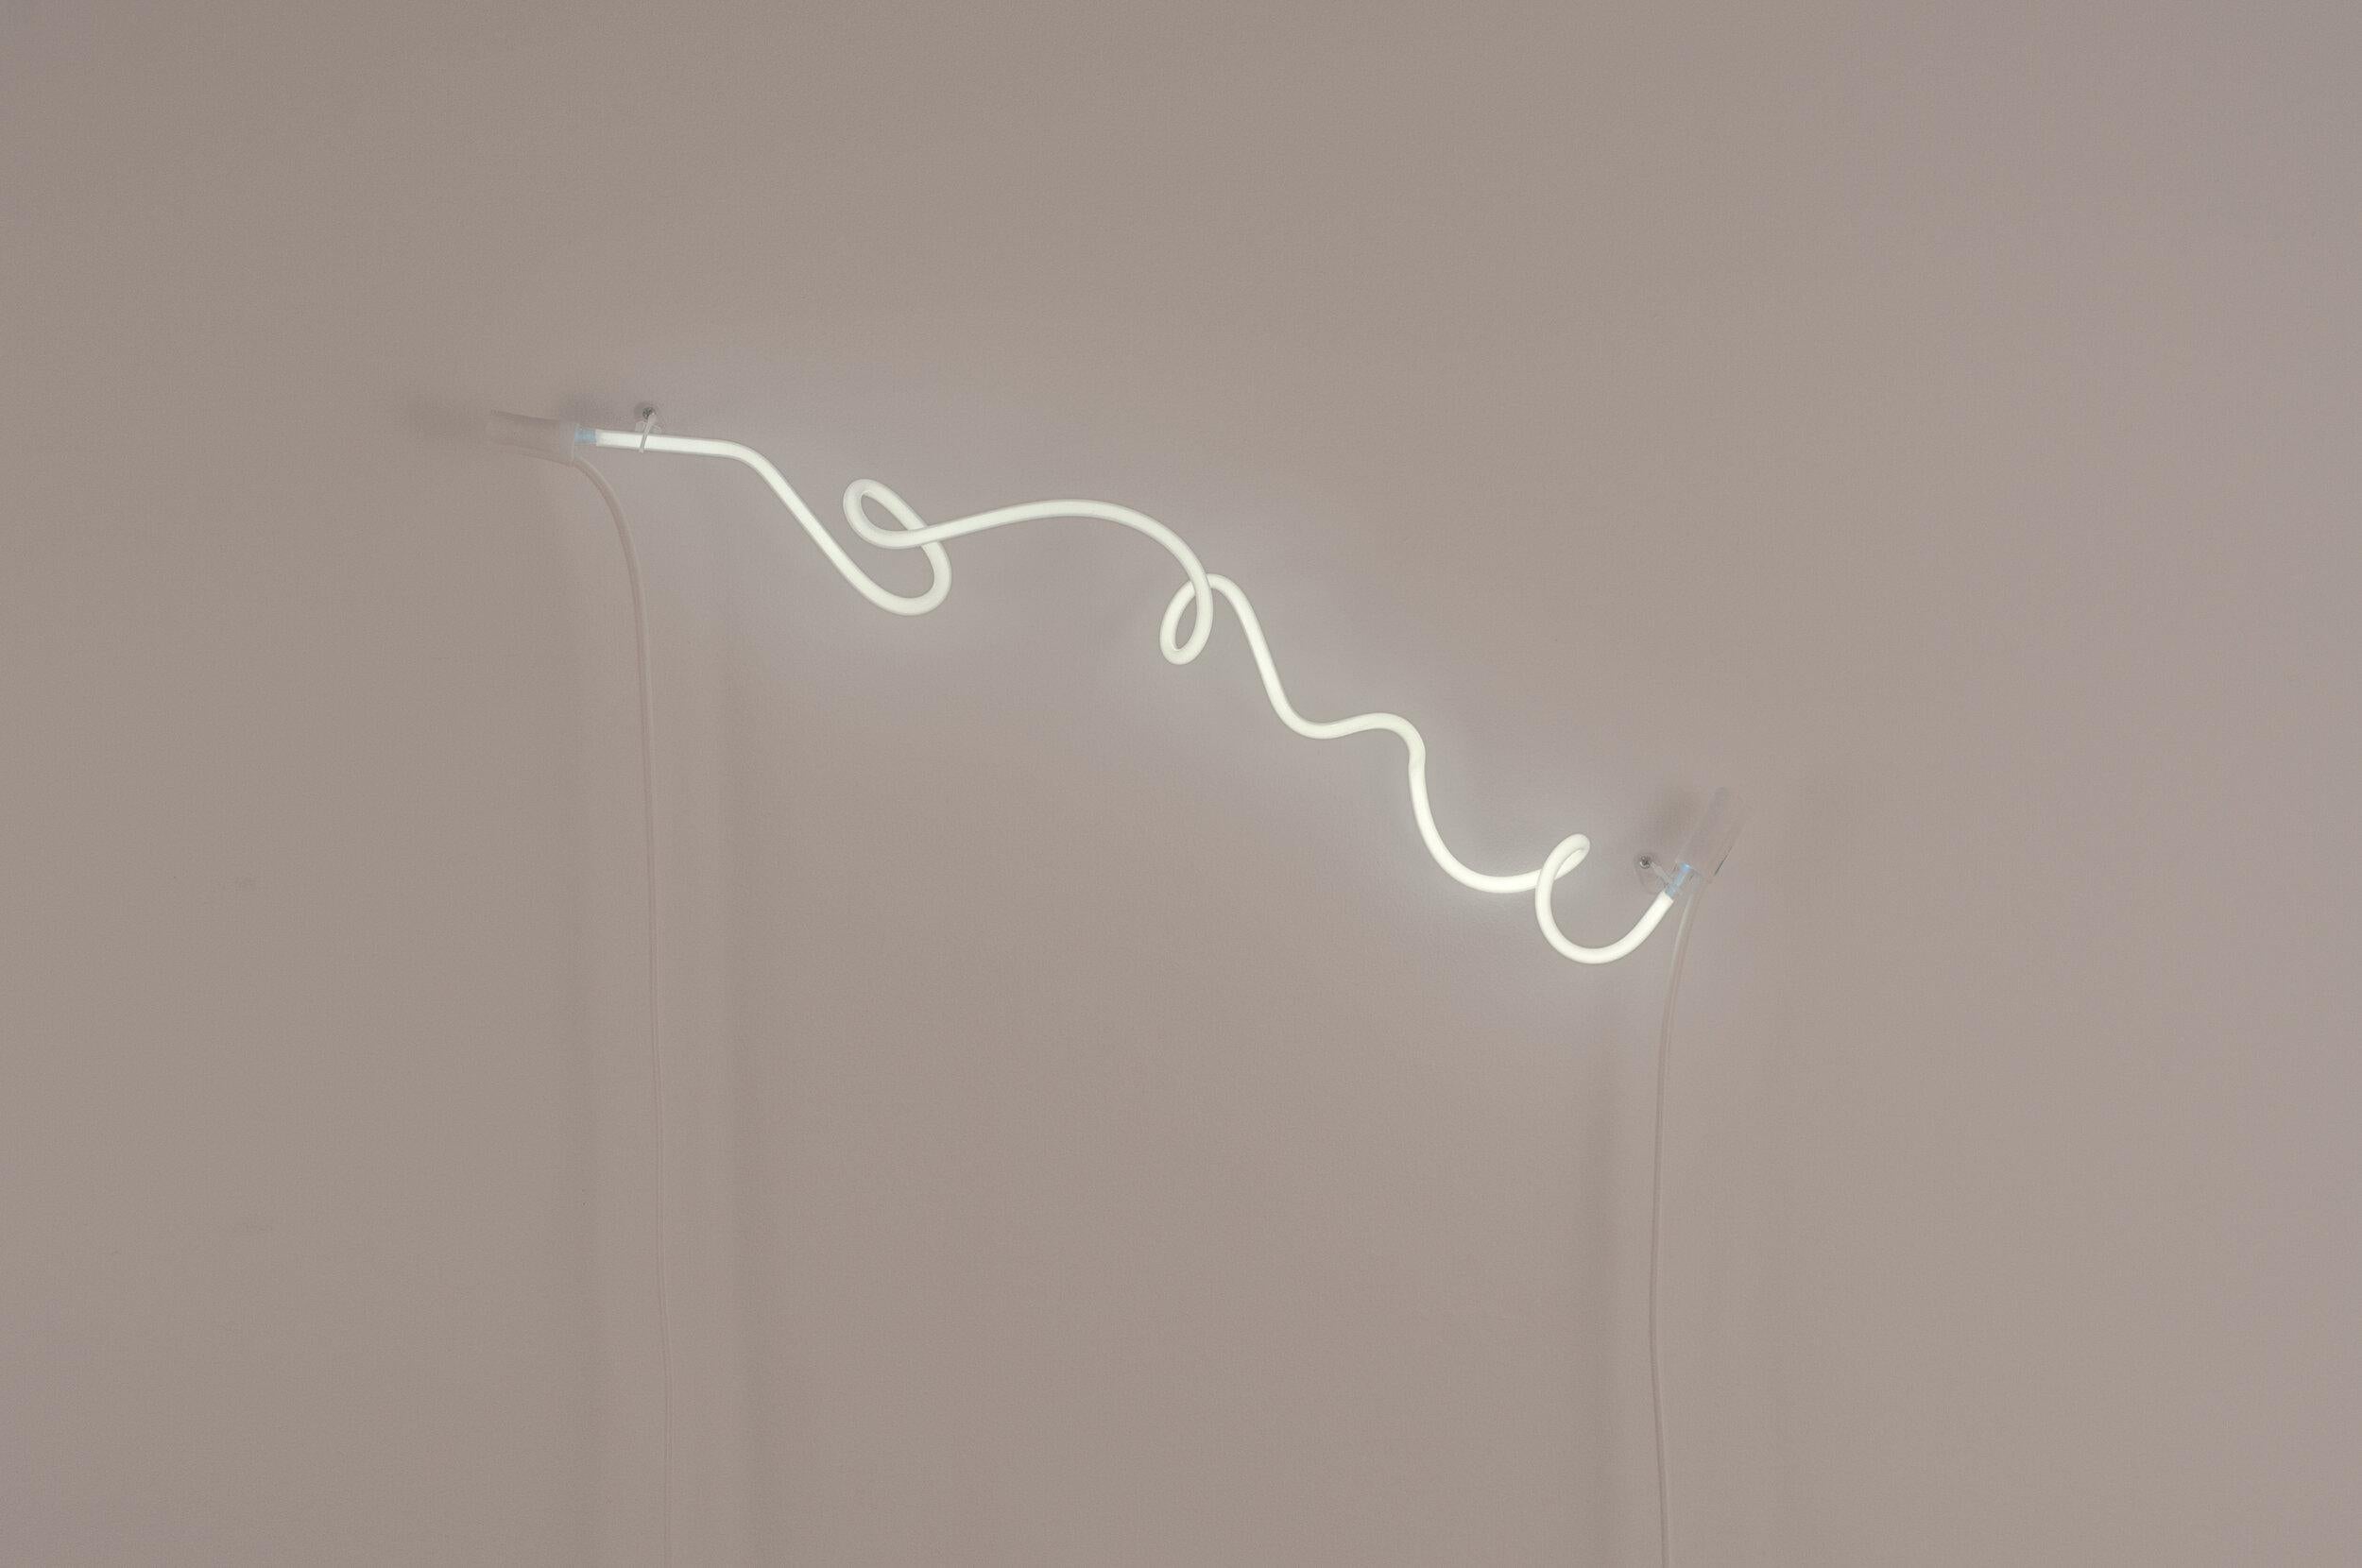 "Float Fall" Soft White Neon (coated glass, argon, wire) light sculpture Minimal